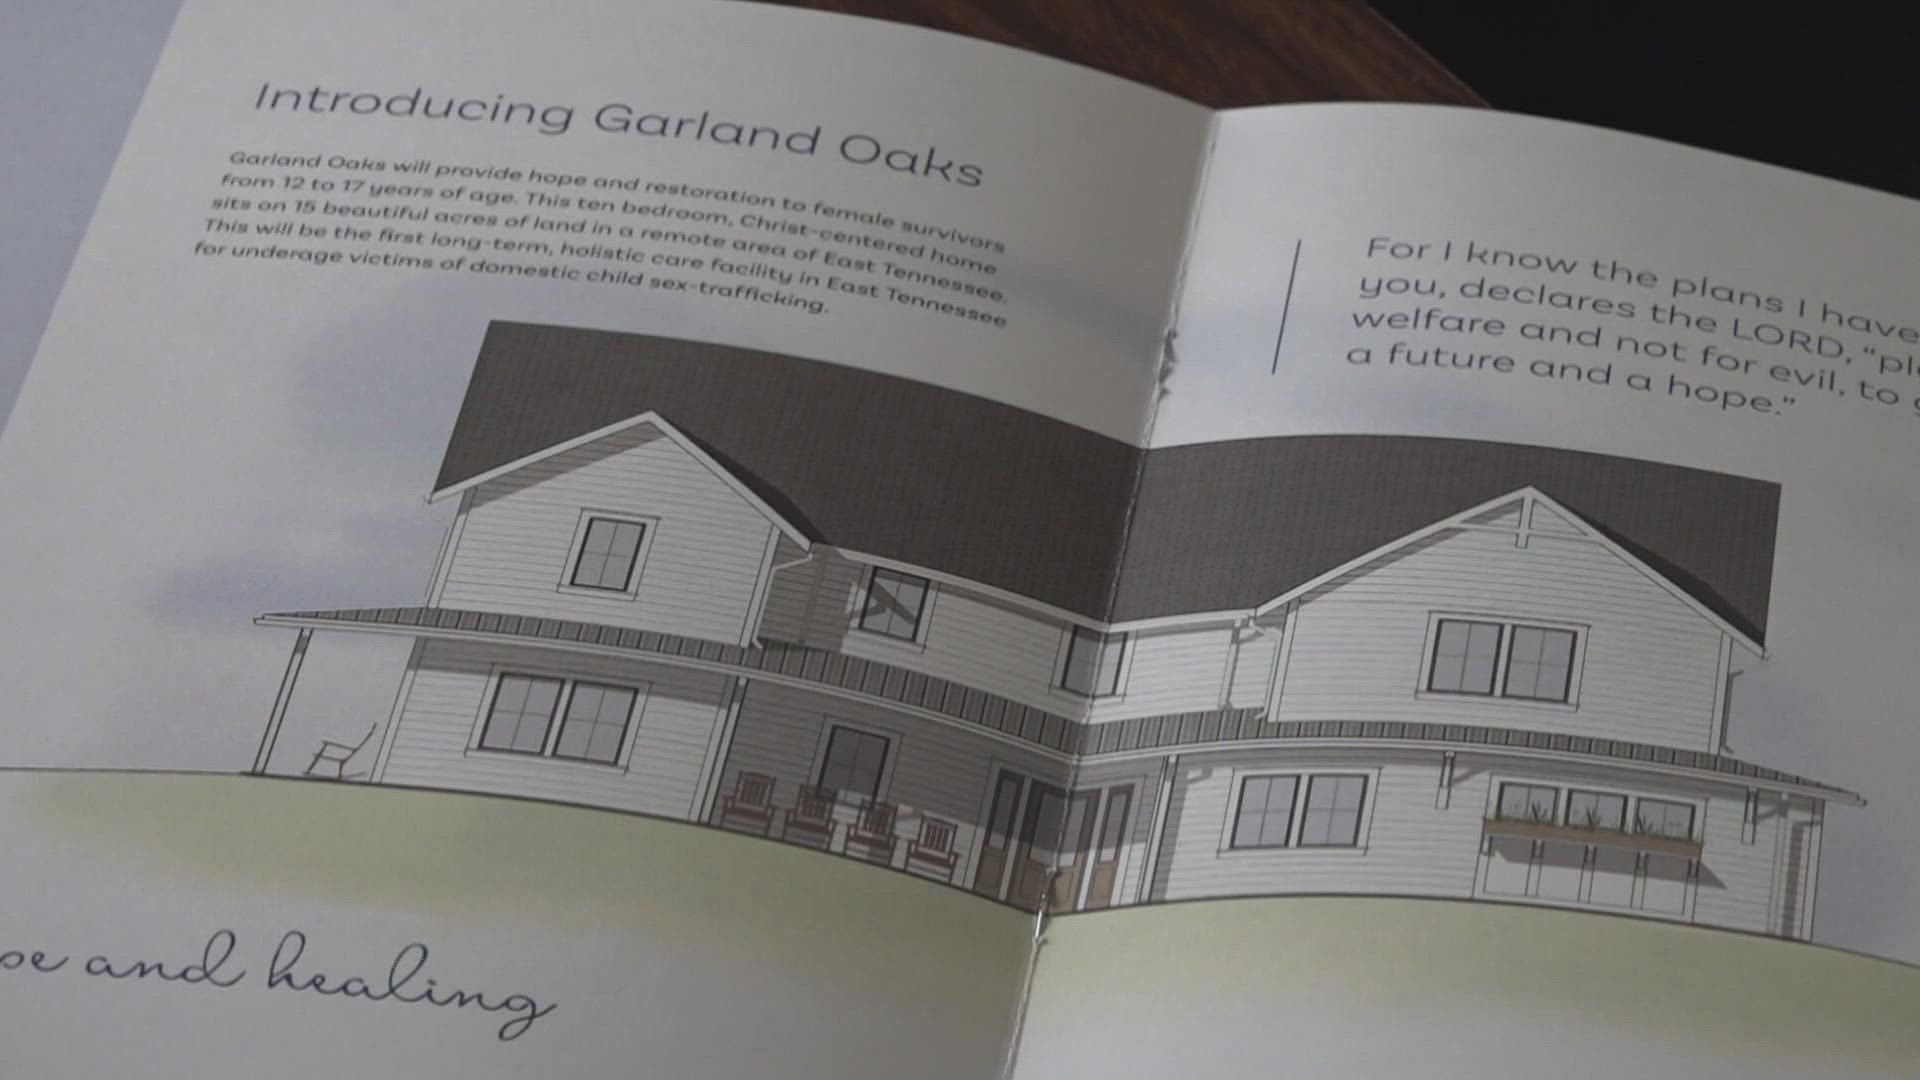 Garland Oaks is a home for girls between 12 years old and 17 years old who are survivors of trafficking.